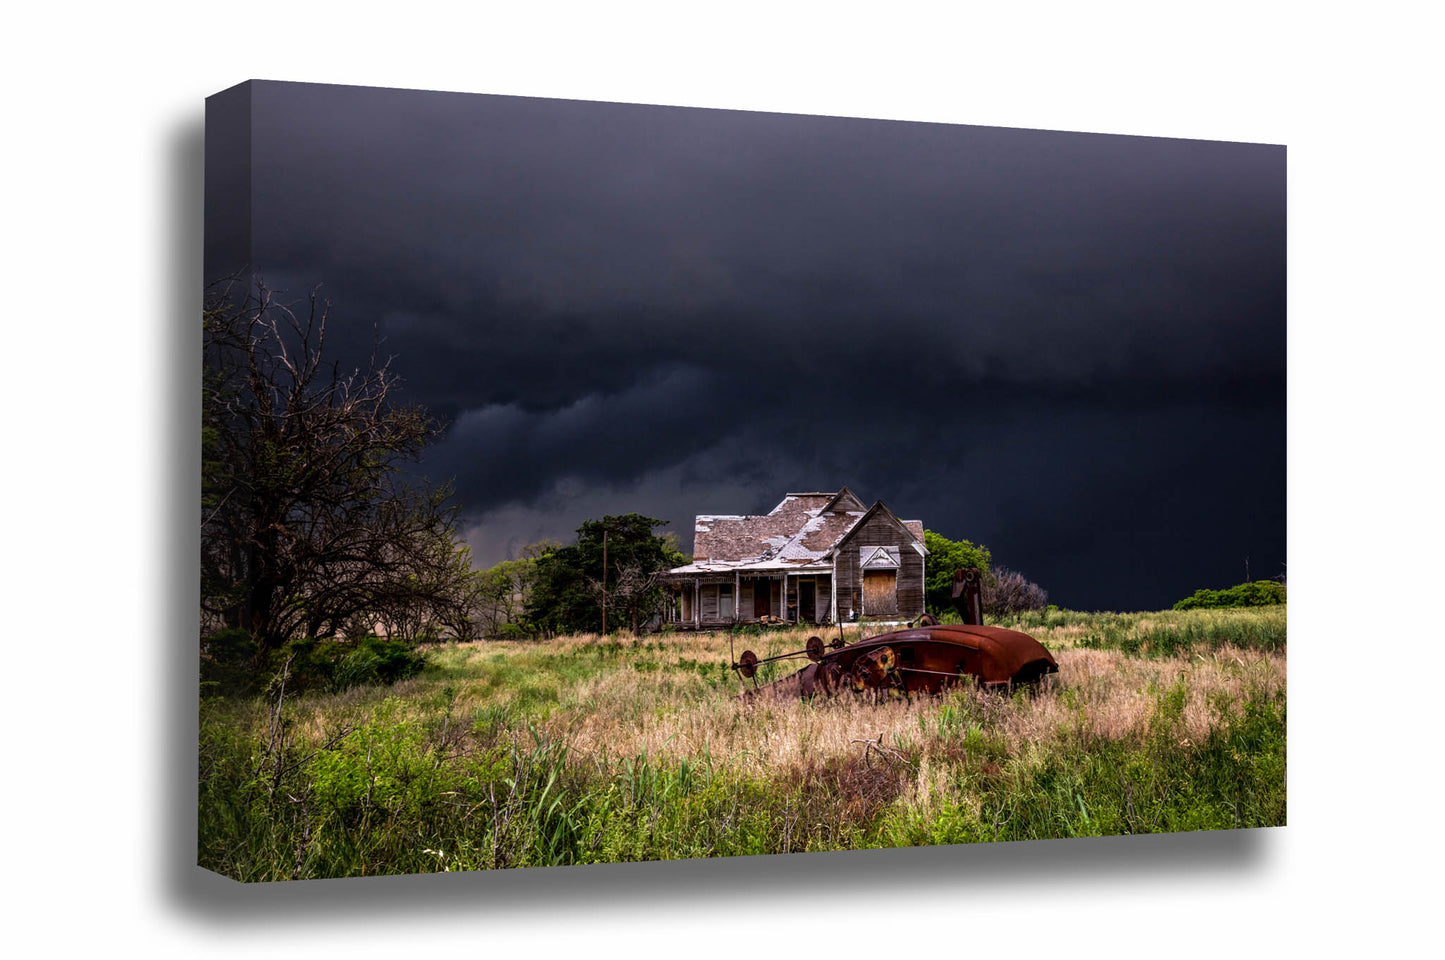 Moody storm canvas wall art of an abandoned house and classic cotton gin on a stormy night in Texas by Sean Ramsey of Southern Plains Photography.